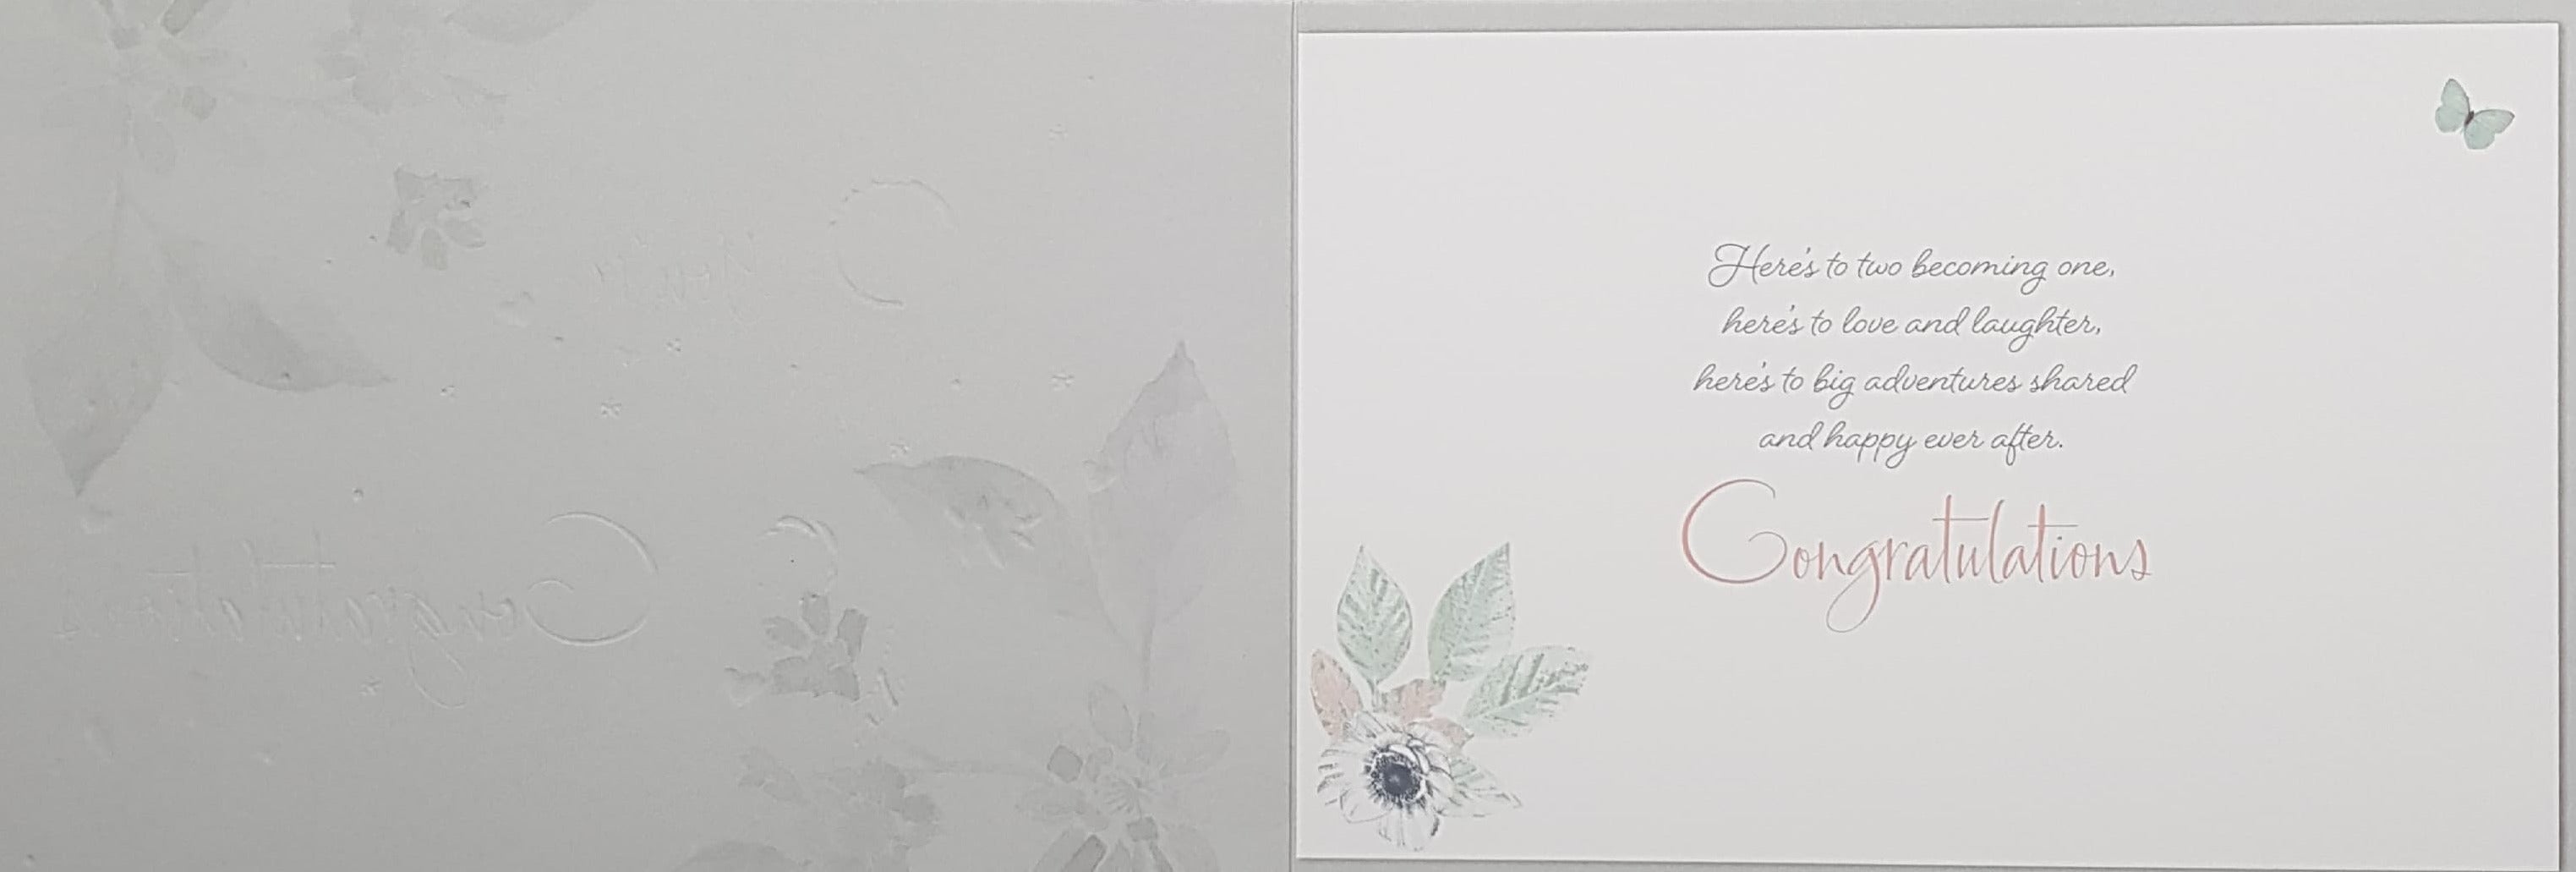 Engagement Card - Silver Engagement Ring & Floral Decoration On Font